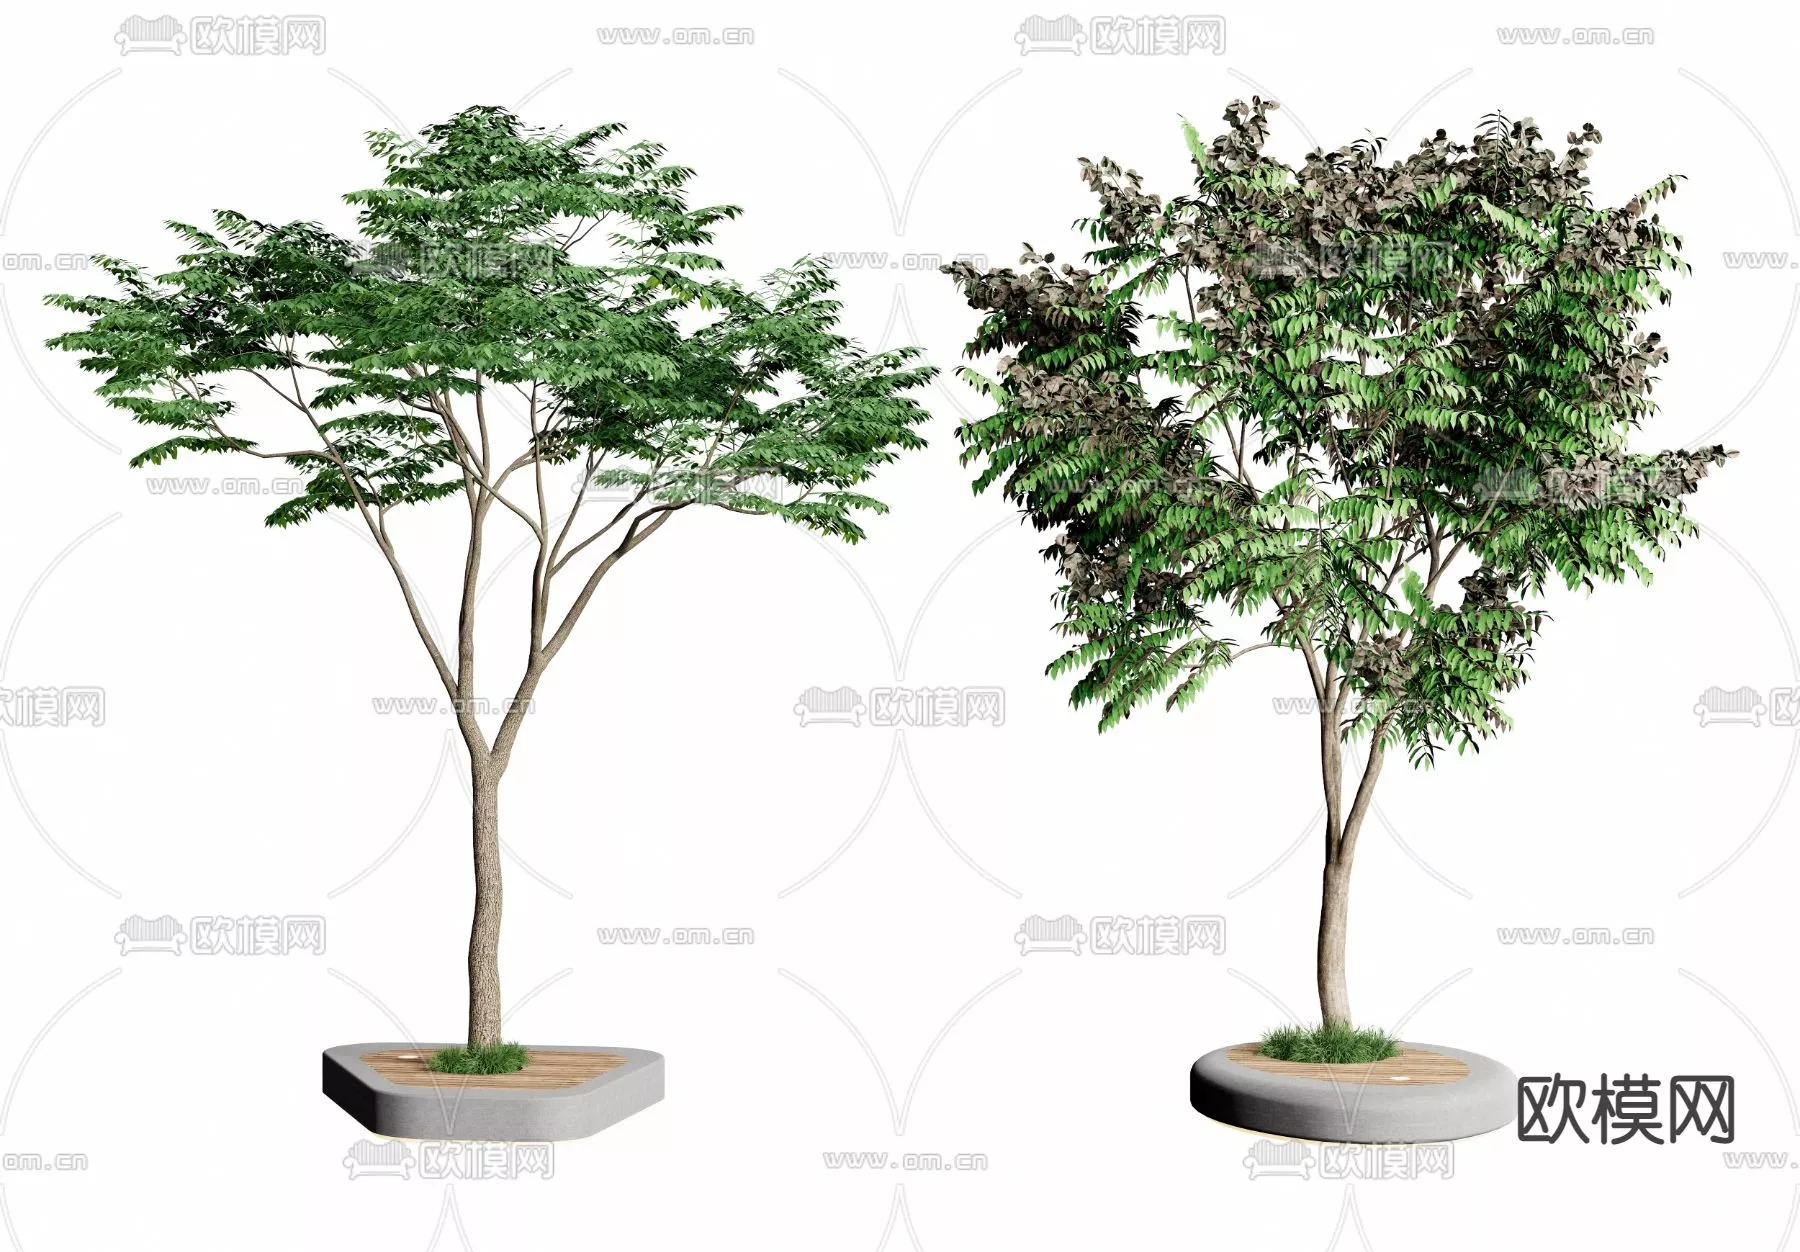 MODERN TREE - SKETCHUP 3D MODEL - VRAY OR ENSCAPE - ID15443